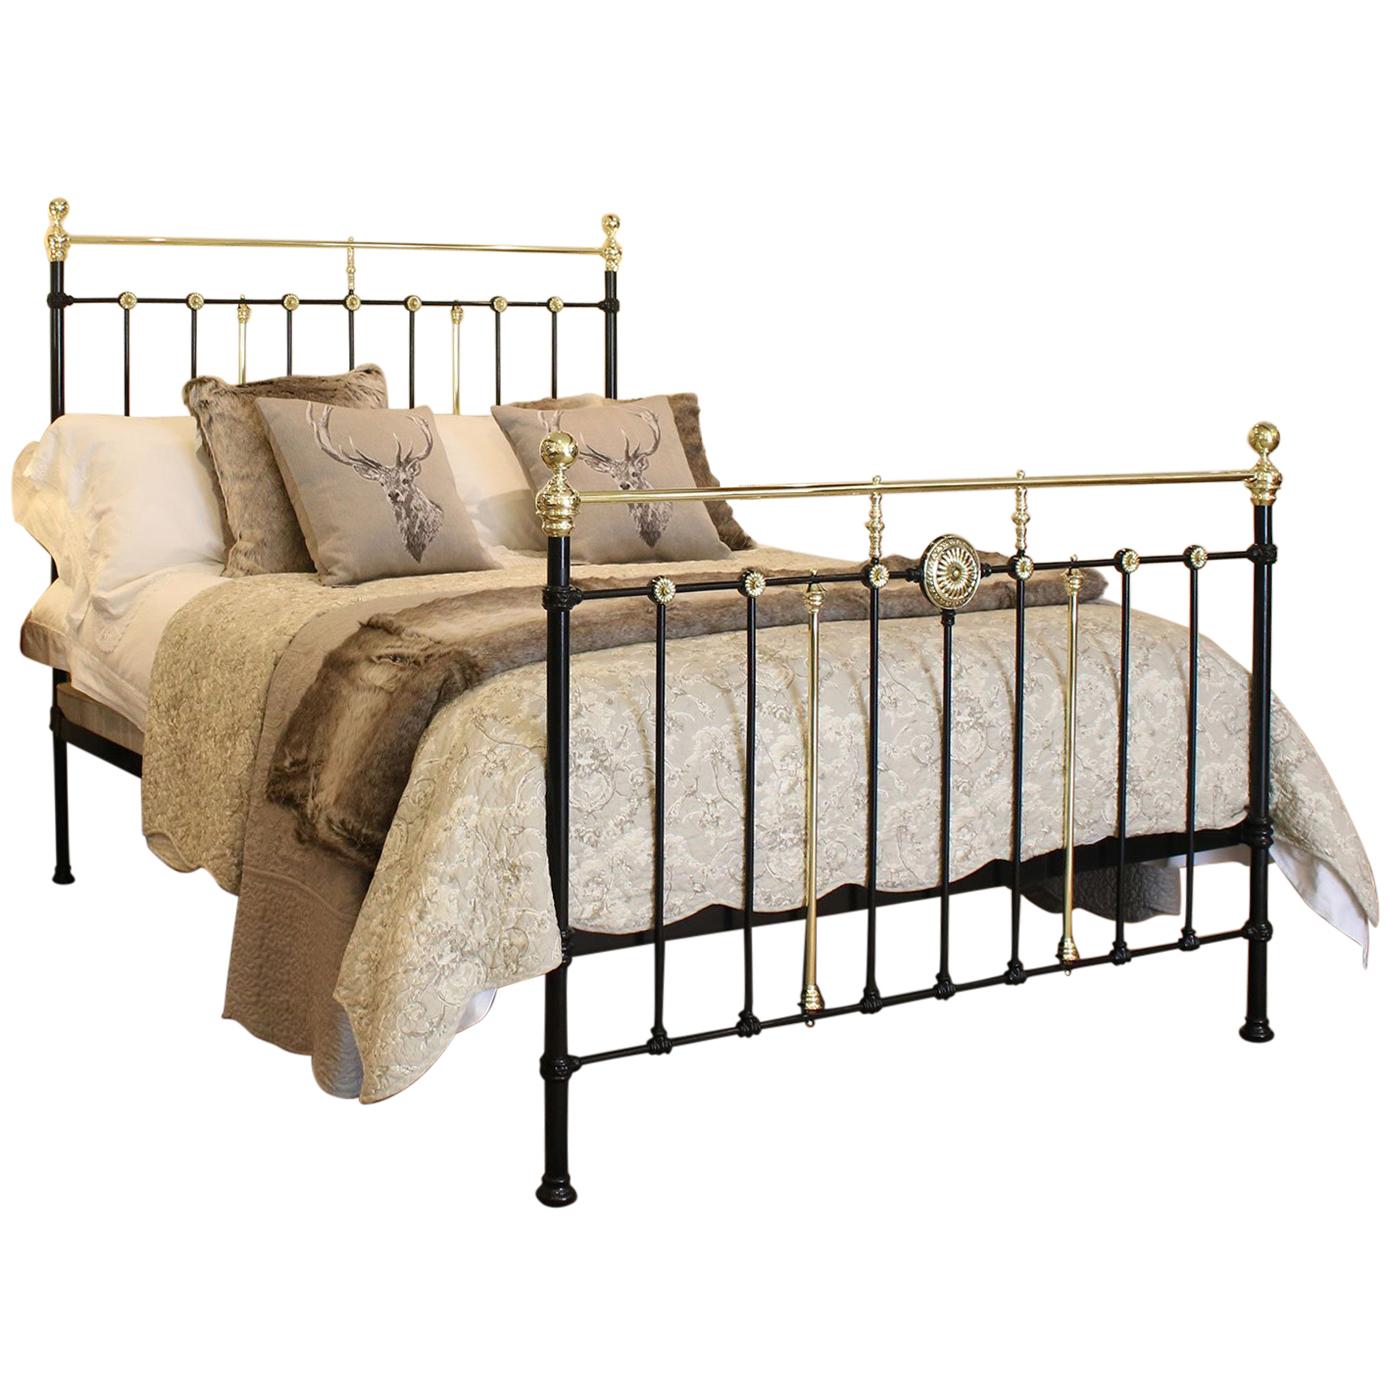 Decorative Brass and Iron Bed - MK147